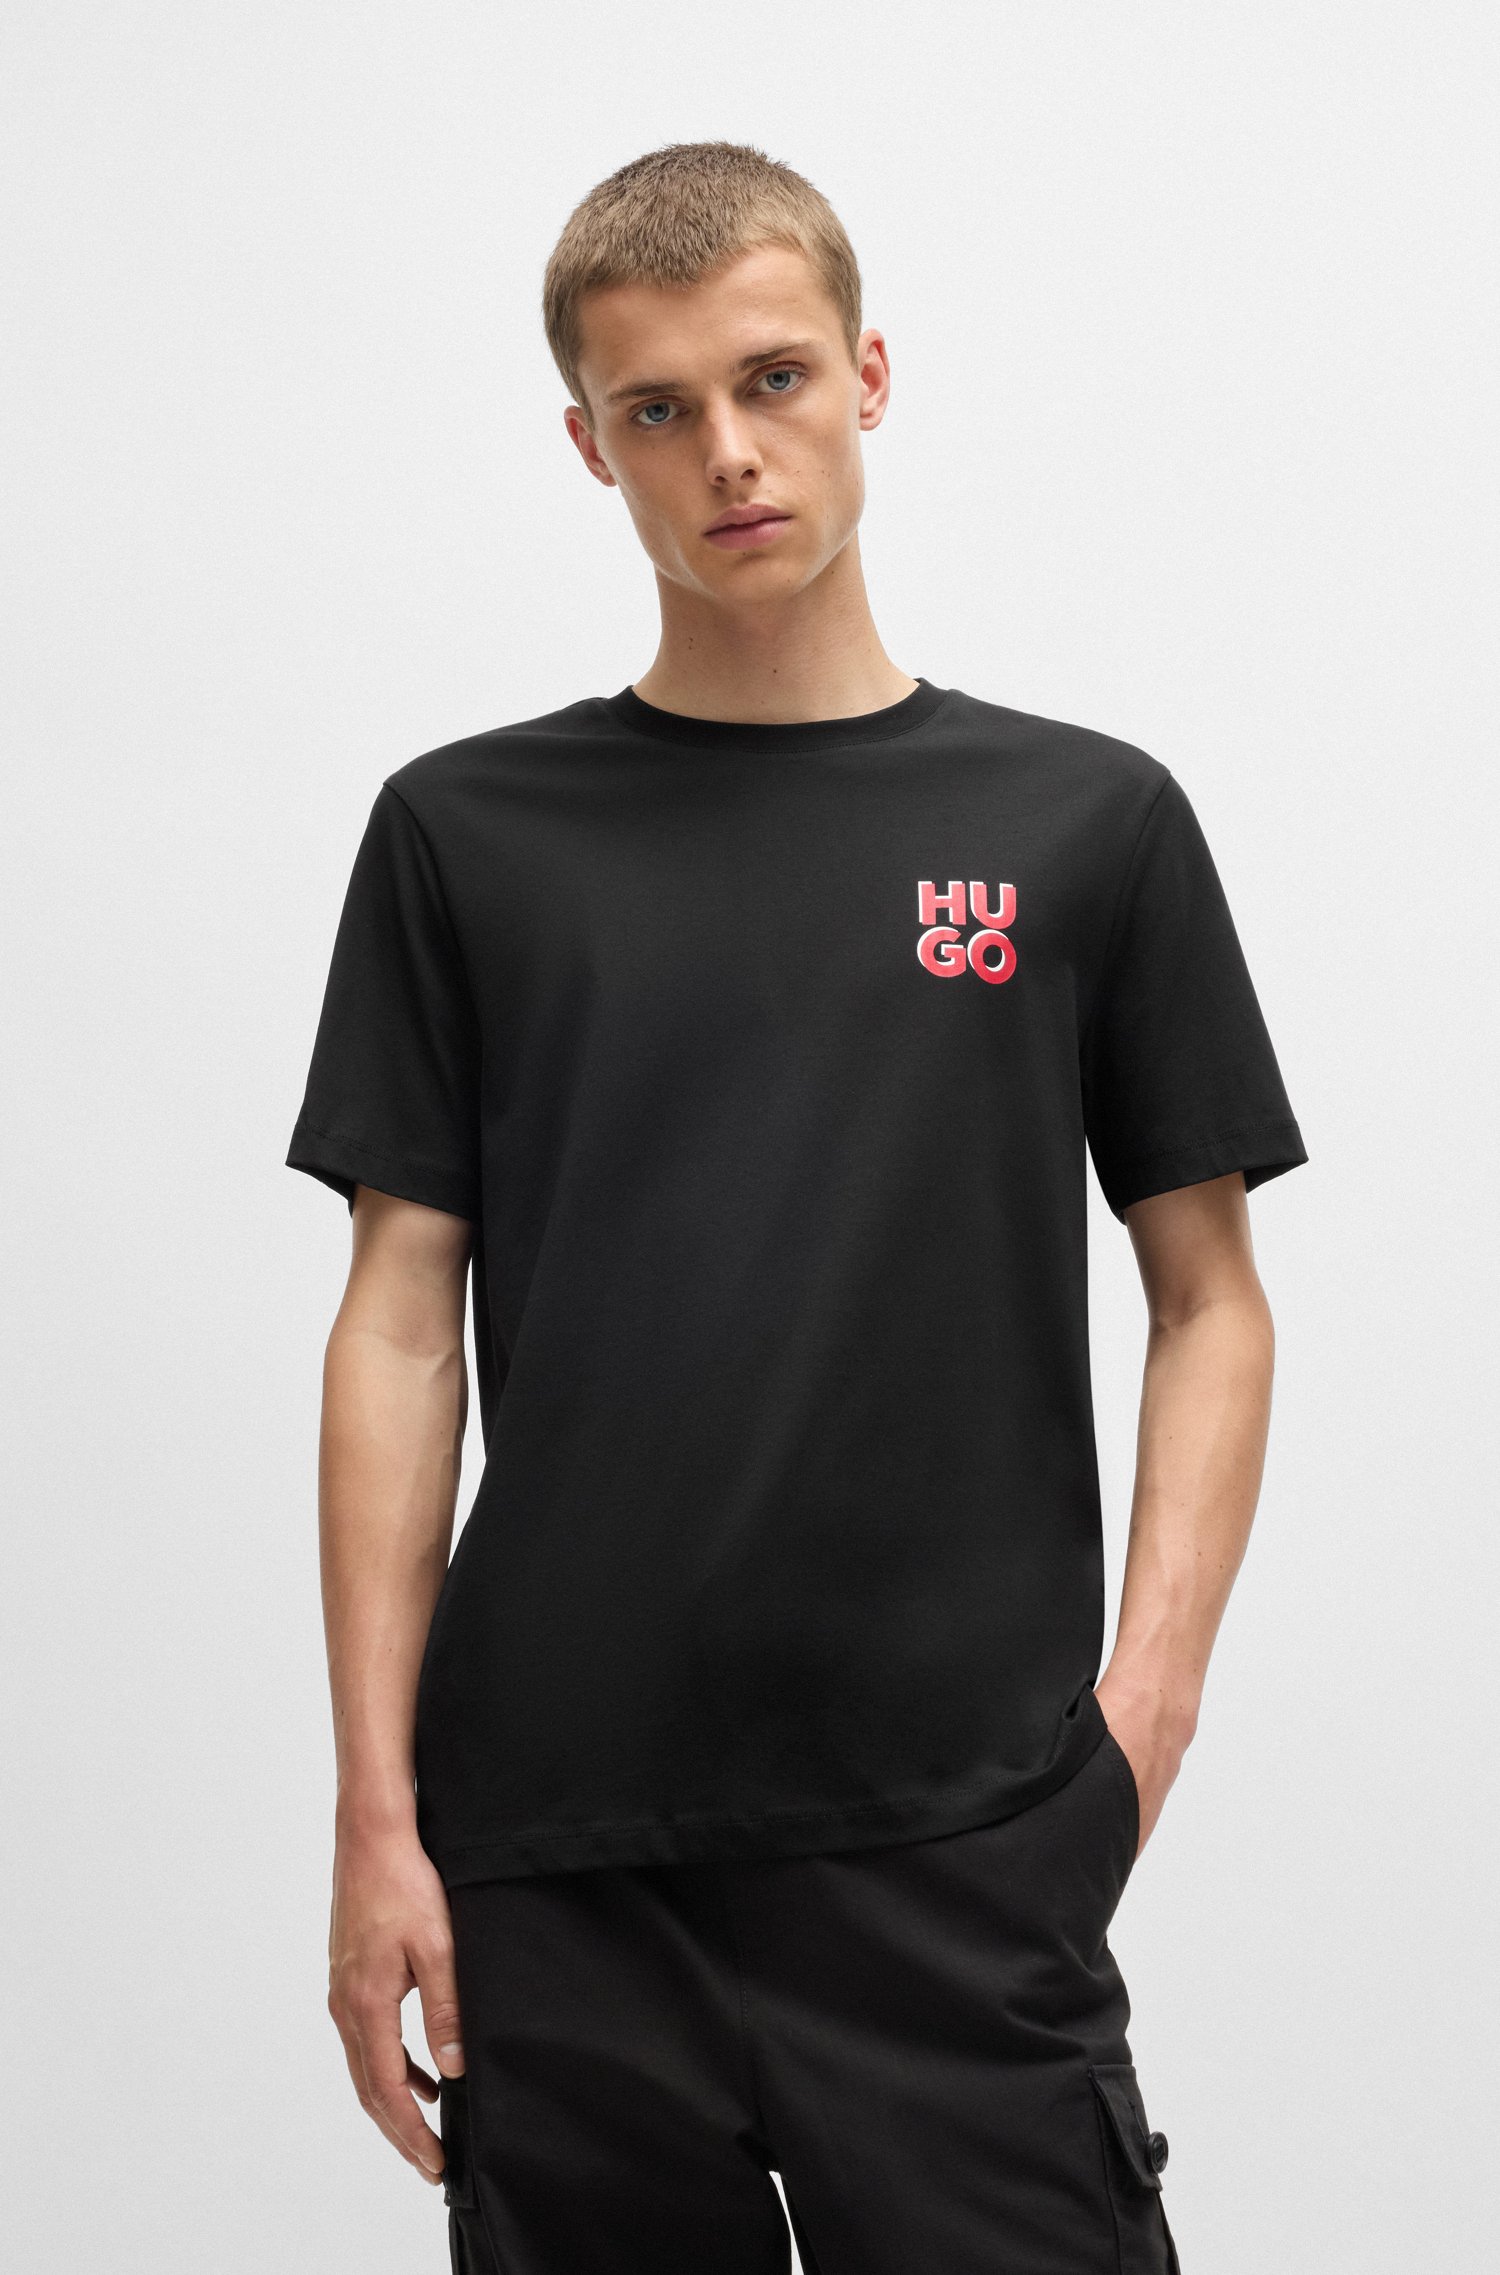 Cotton-jersey T-shirt with stacked logo print